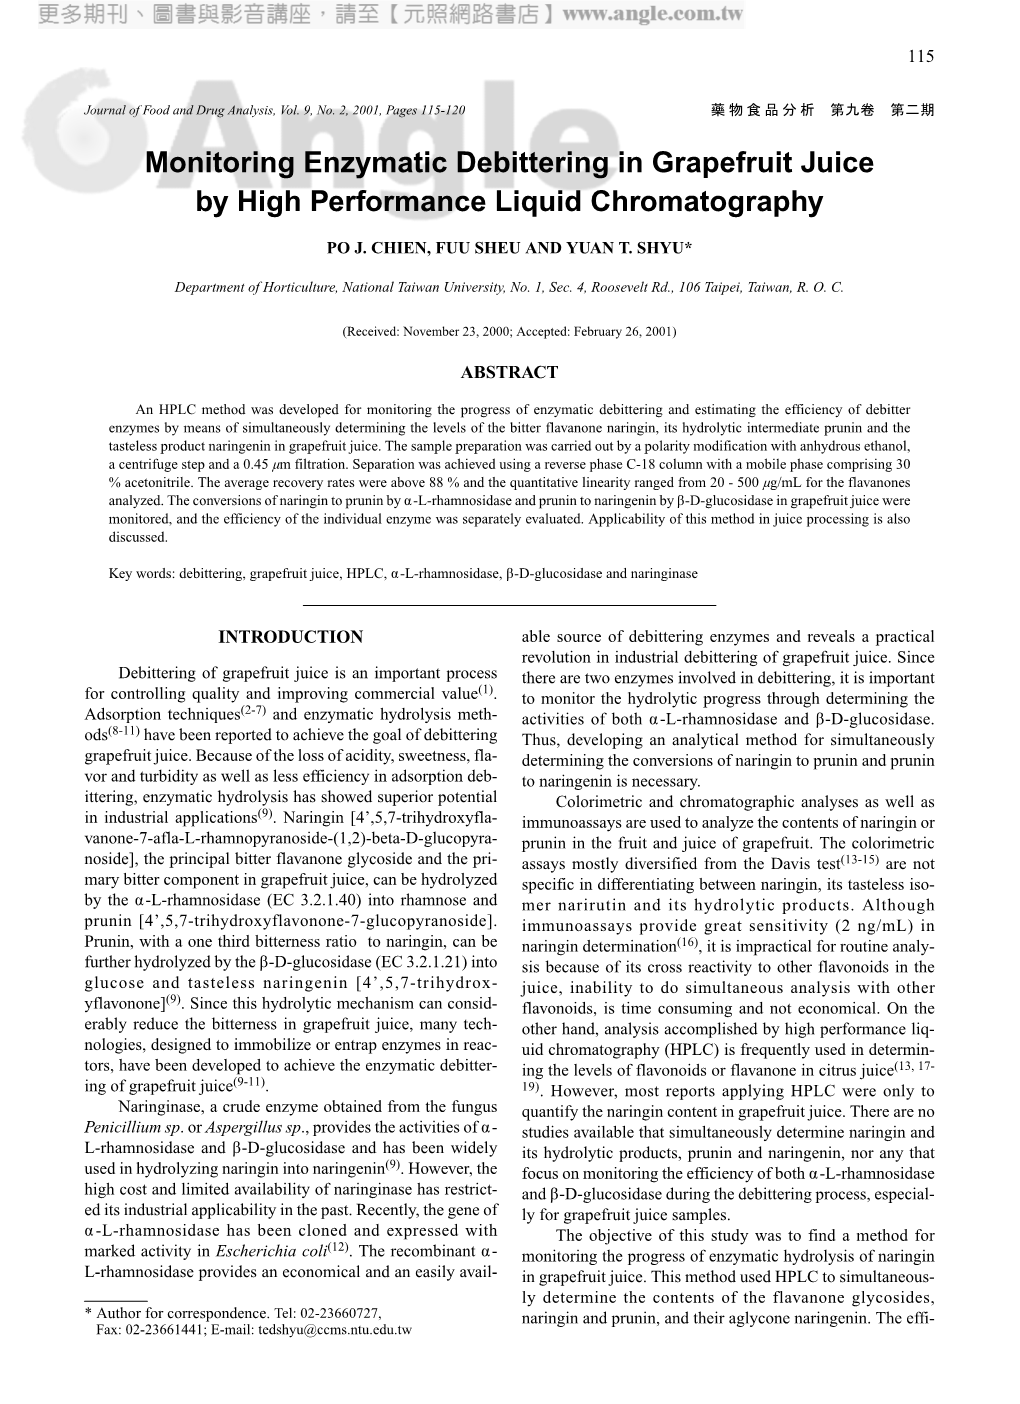 Monitoring Enzymatic Debittering in Grapefruit Juice by High Performance Liquid Chromatography